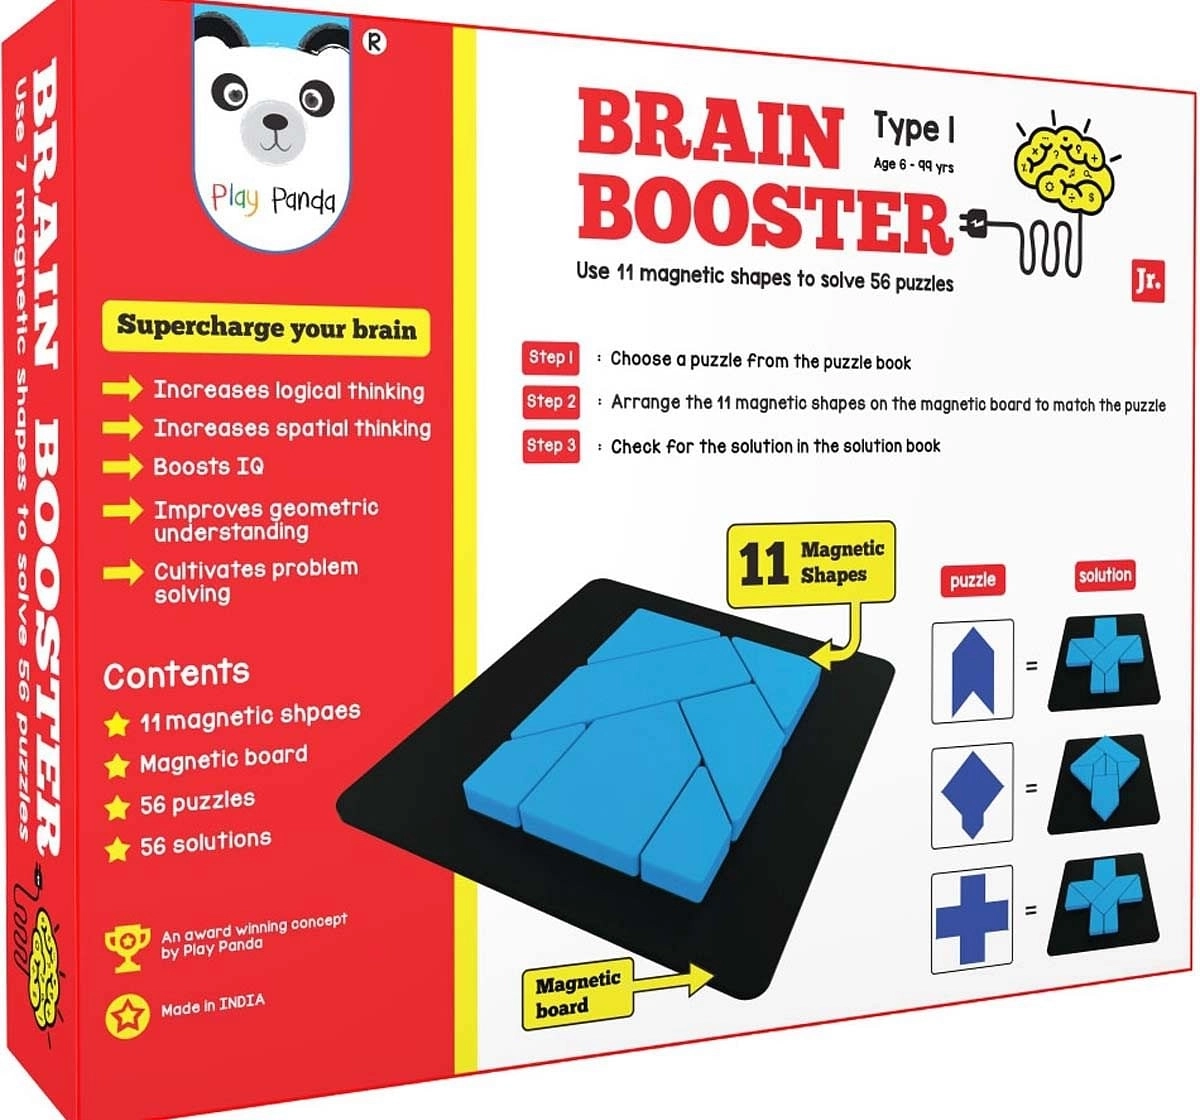 Play Panda Brain Booster Type 1 (Junior) - 56 Puzzles Designed To Boost Intelligence - With Magnetic Shapes, Magnetic Board, Puzzle Book And Solution Book Puzzles for Kids Age 6Y+